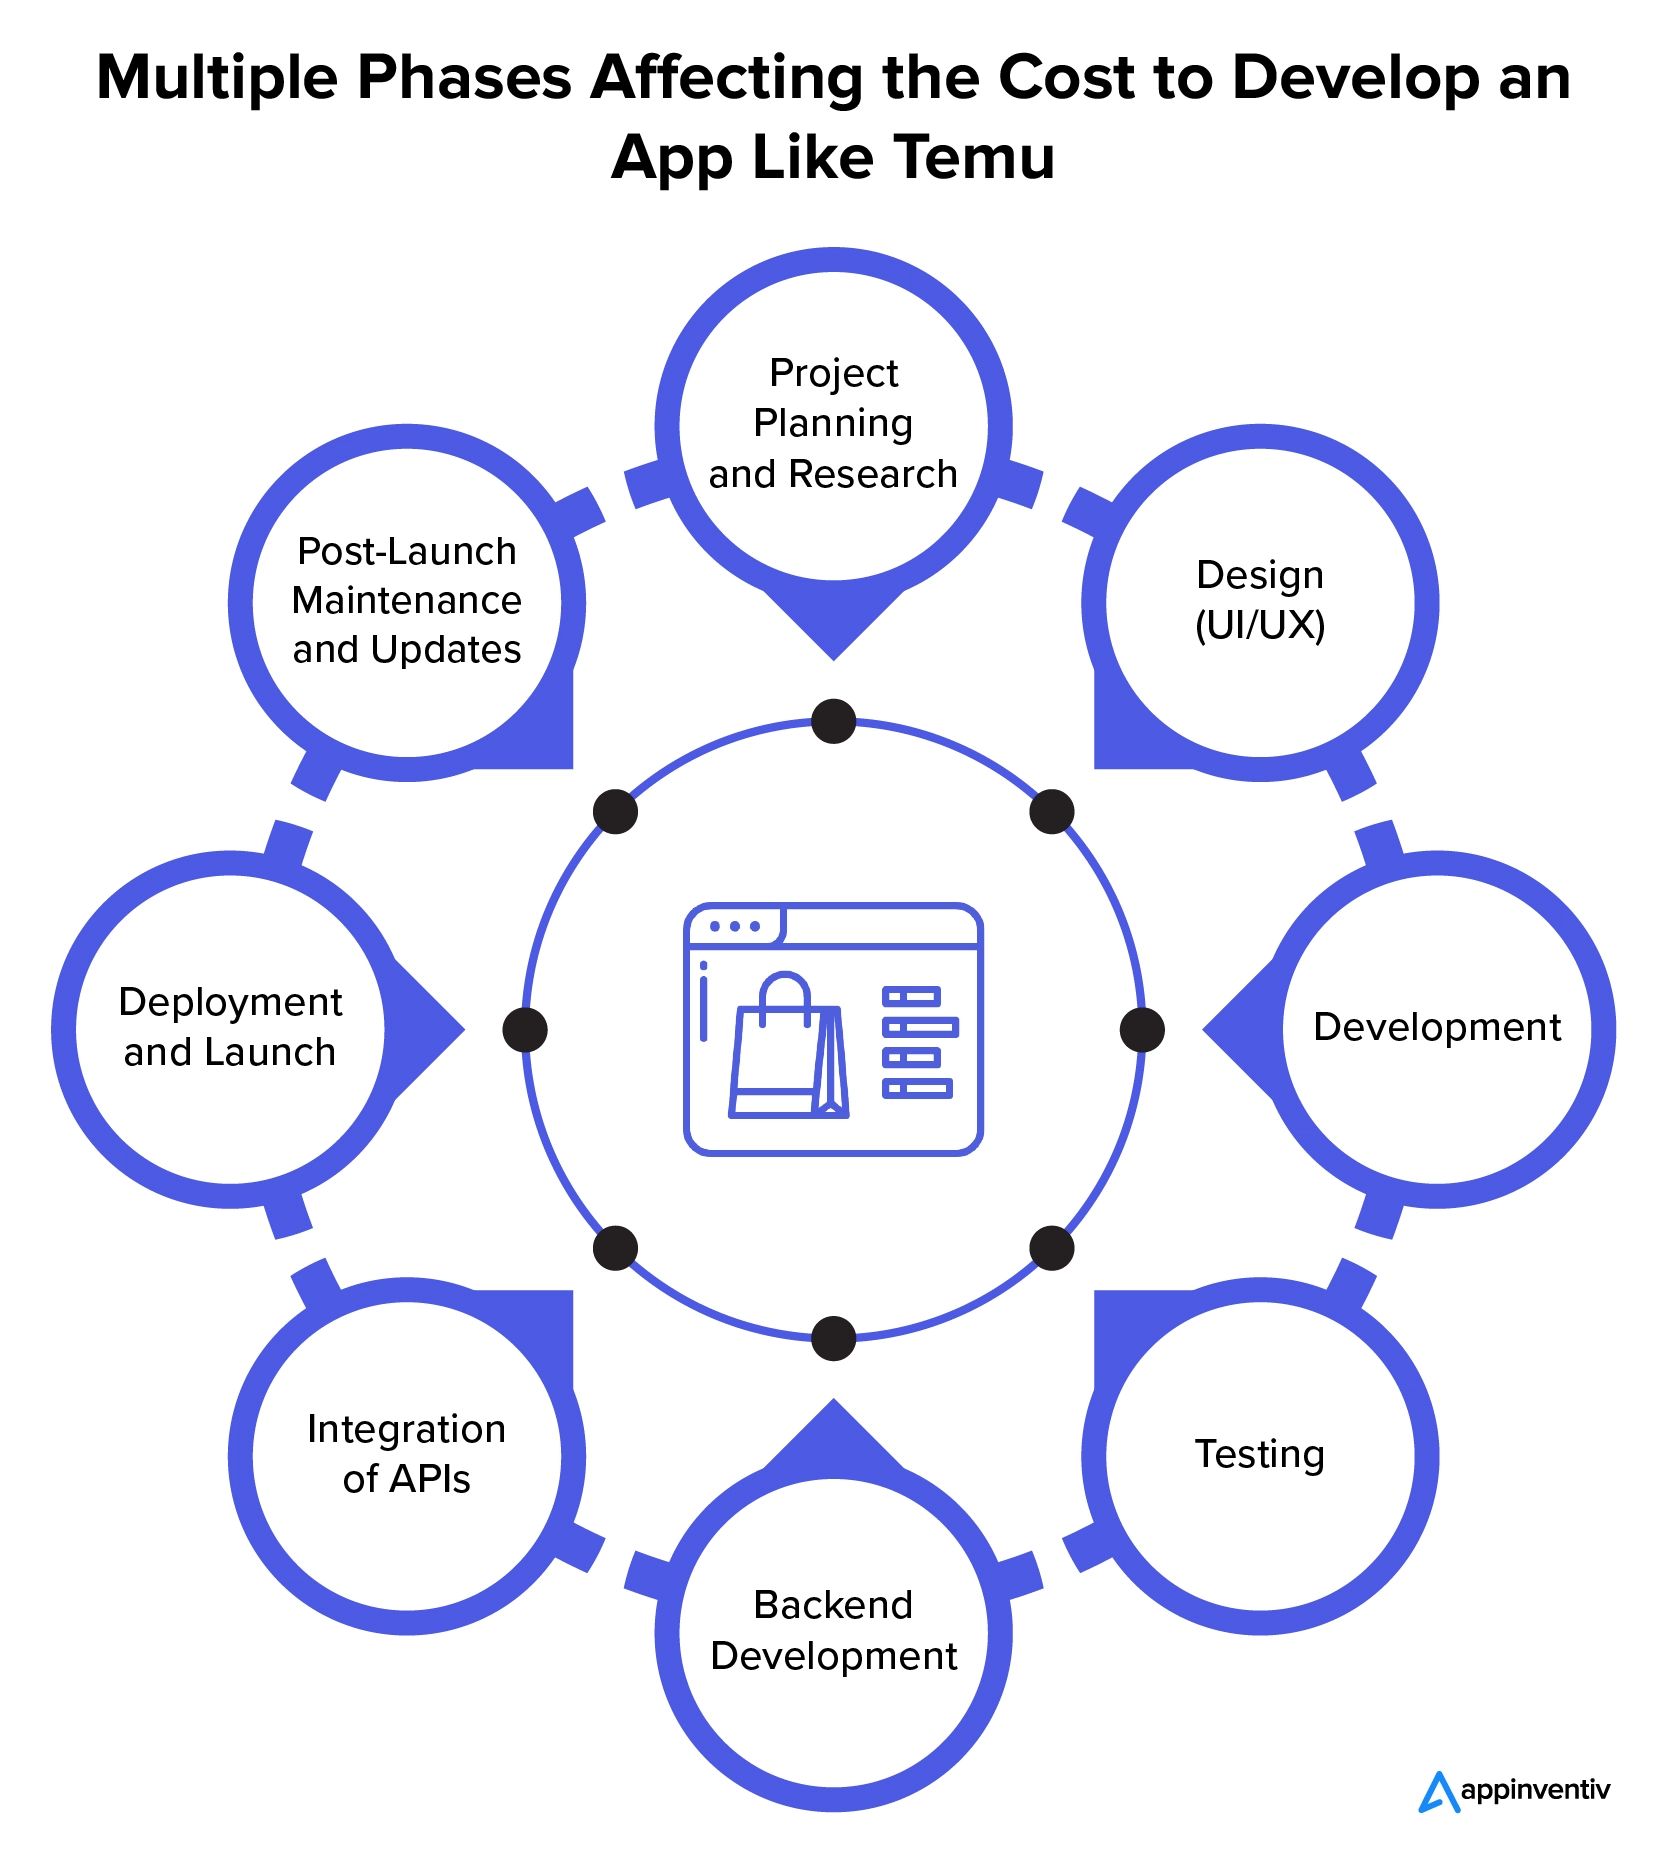 Multiple phases that affect the cost to develop an app like Temu